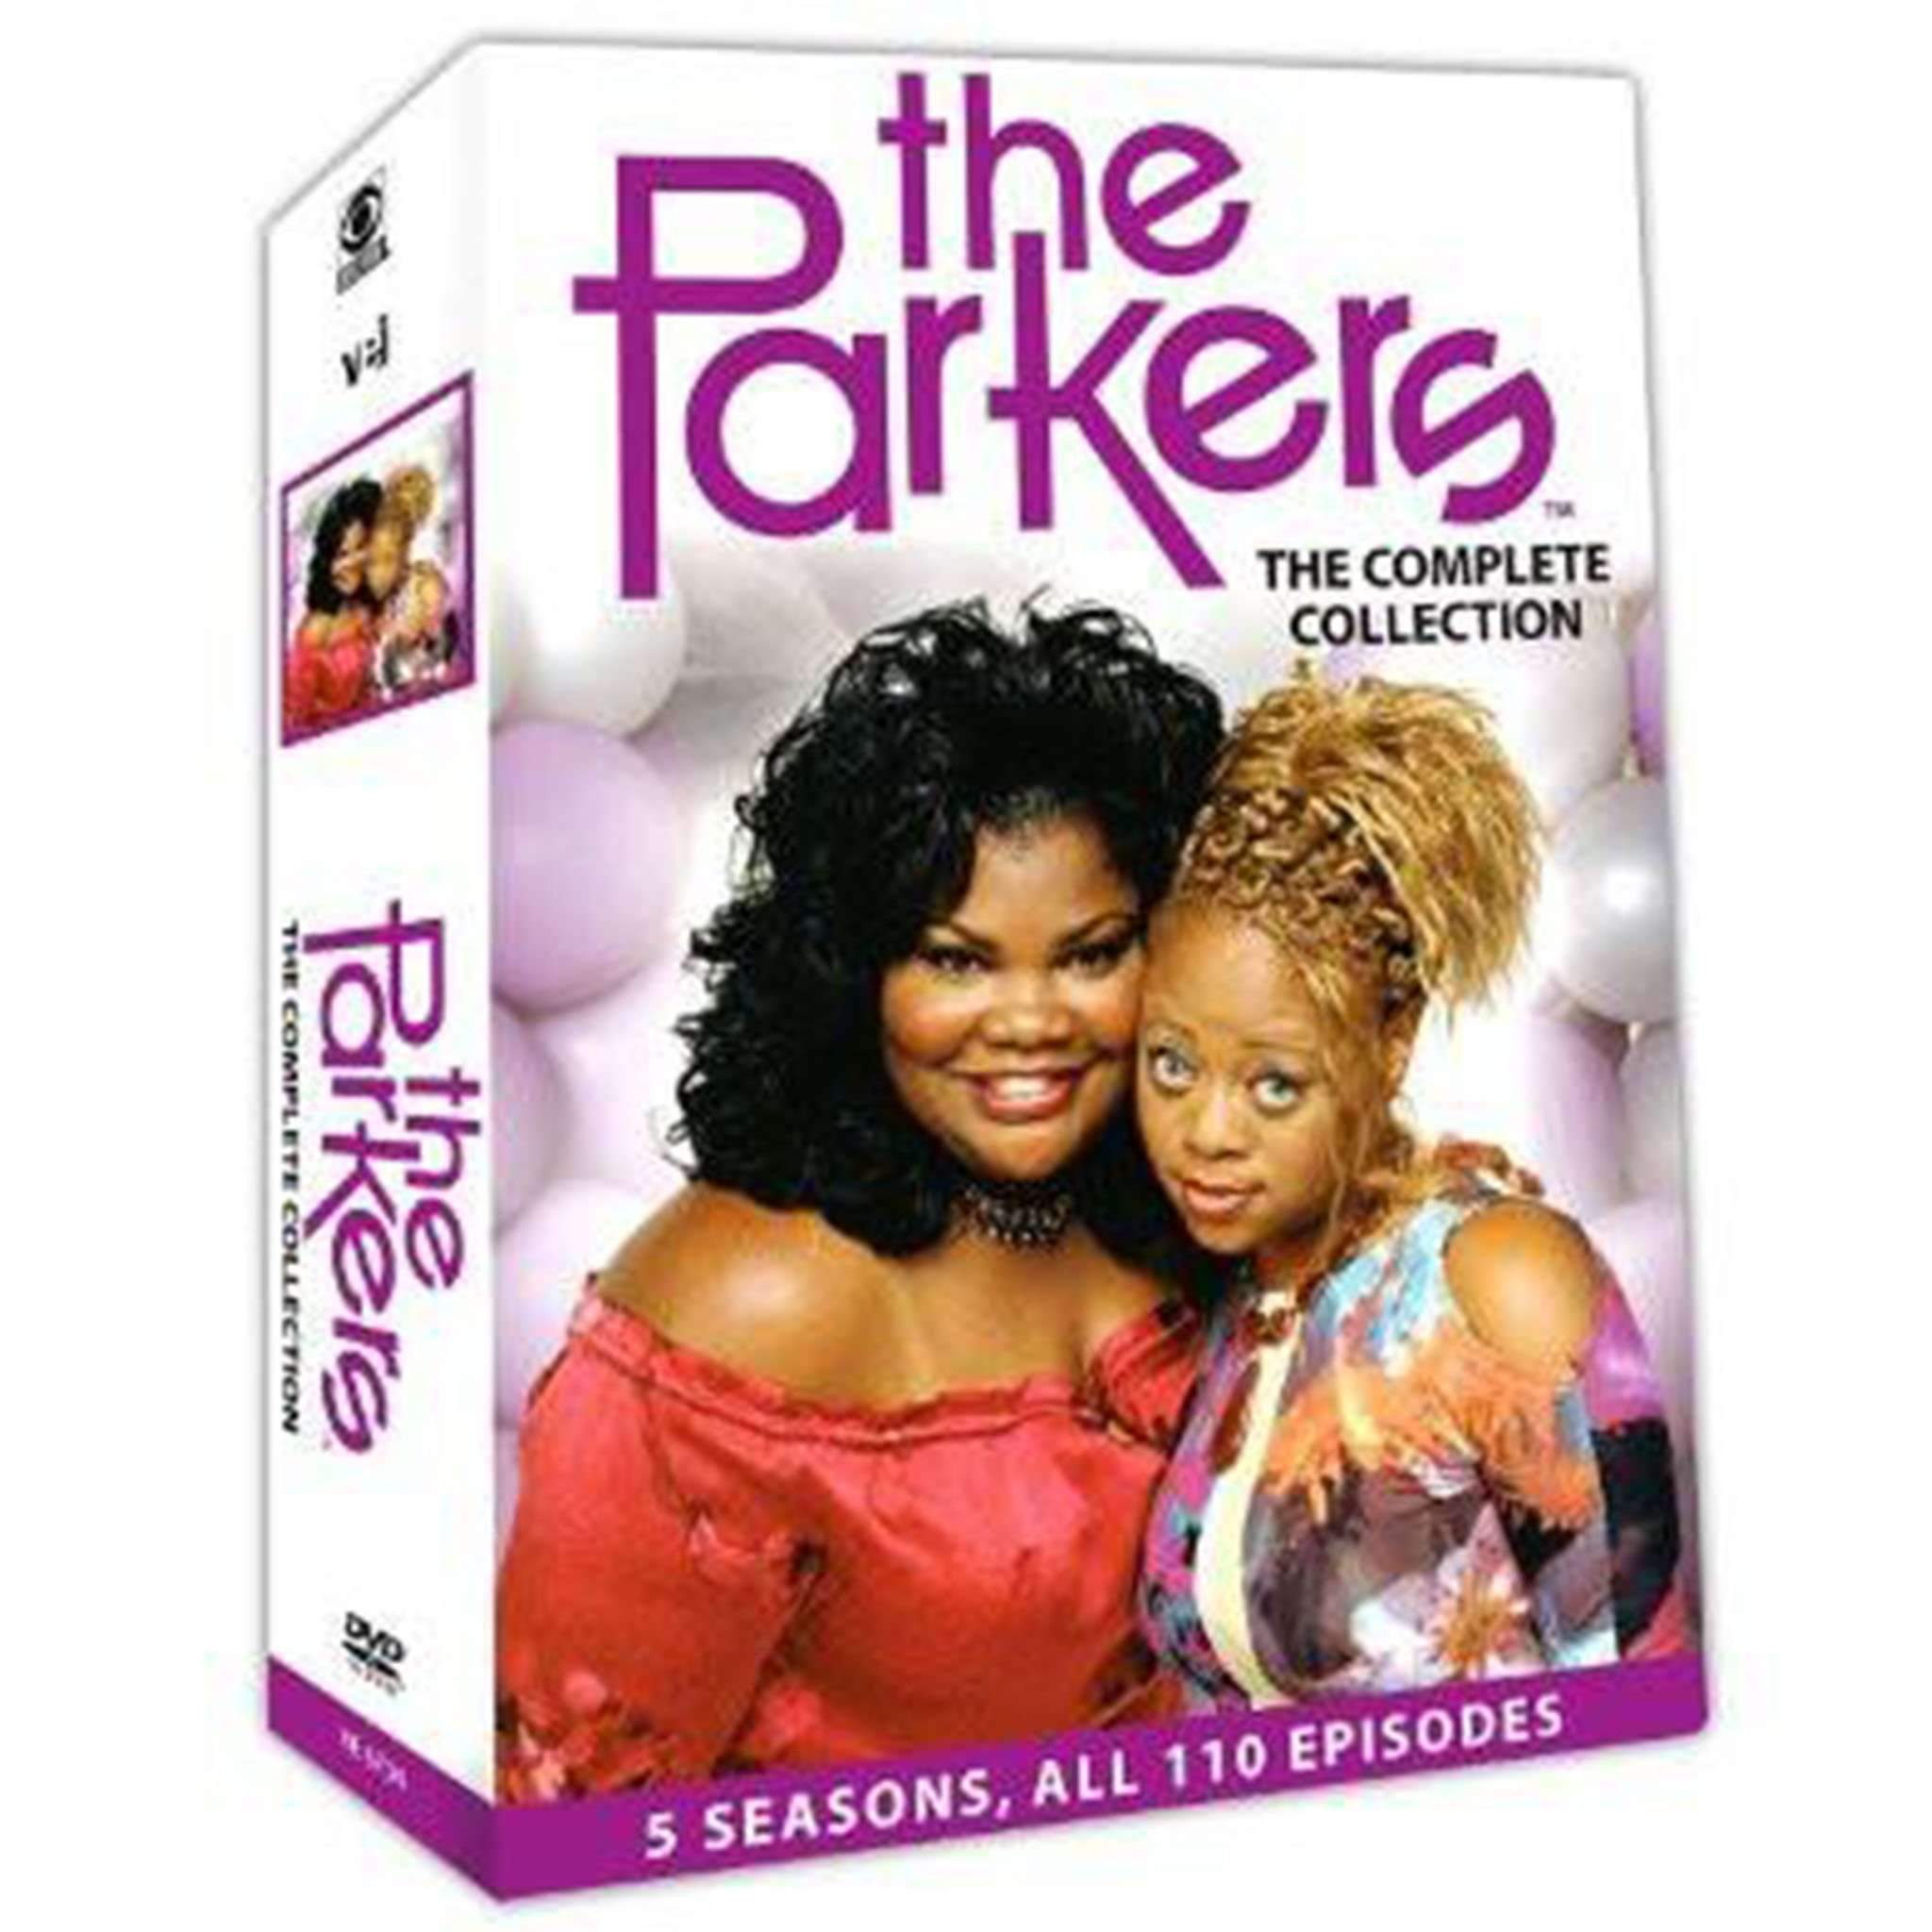 The Parkers DVD Complete Series Box Set Visual Entertainment DVDs & Blu-ray Discs > DVDs > Box Sets